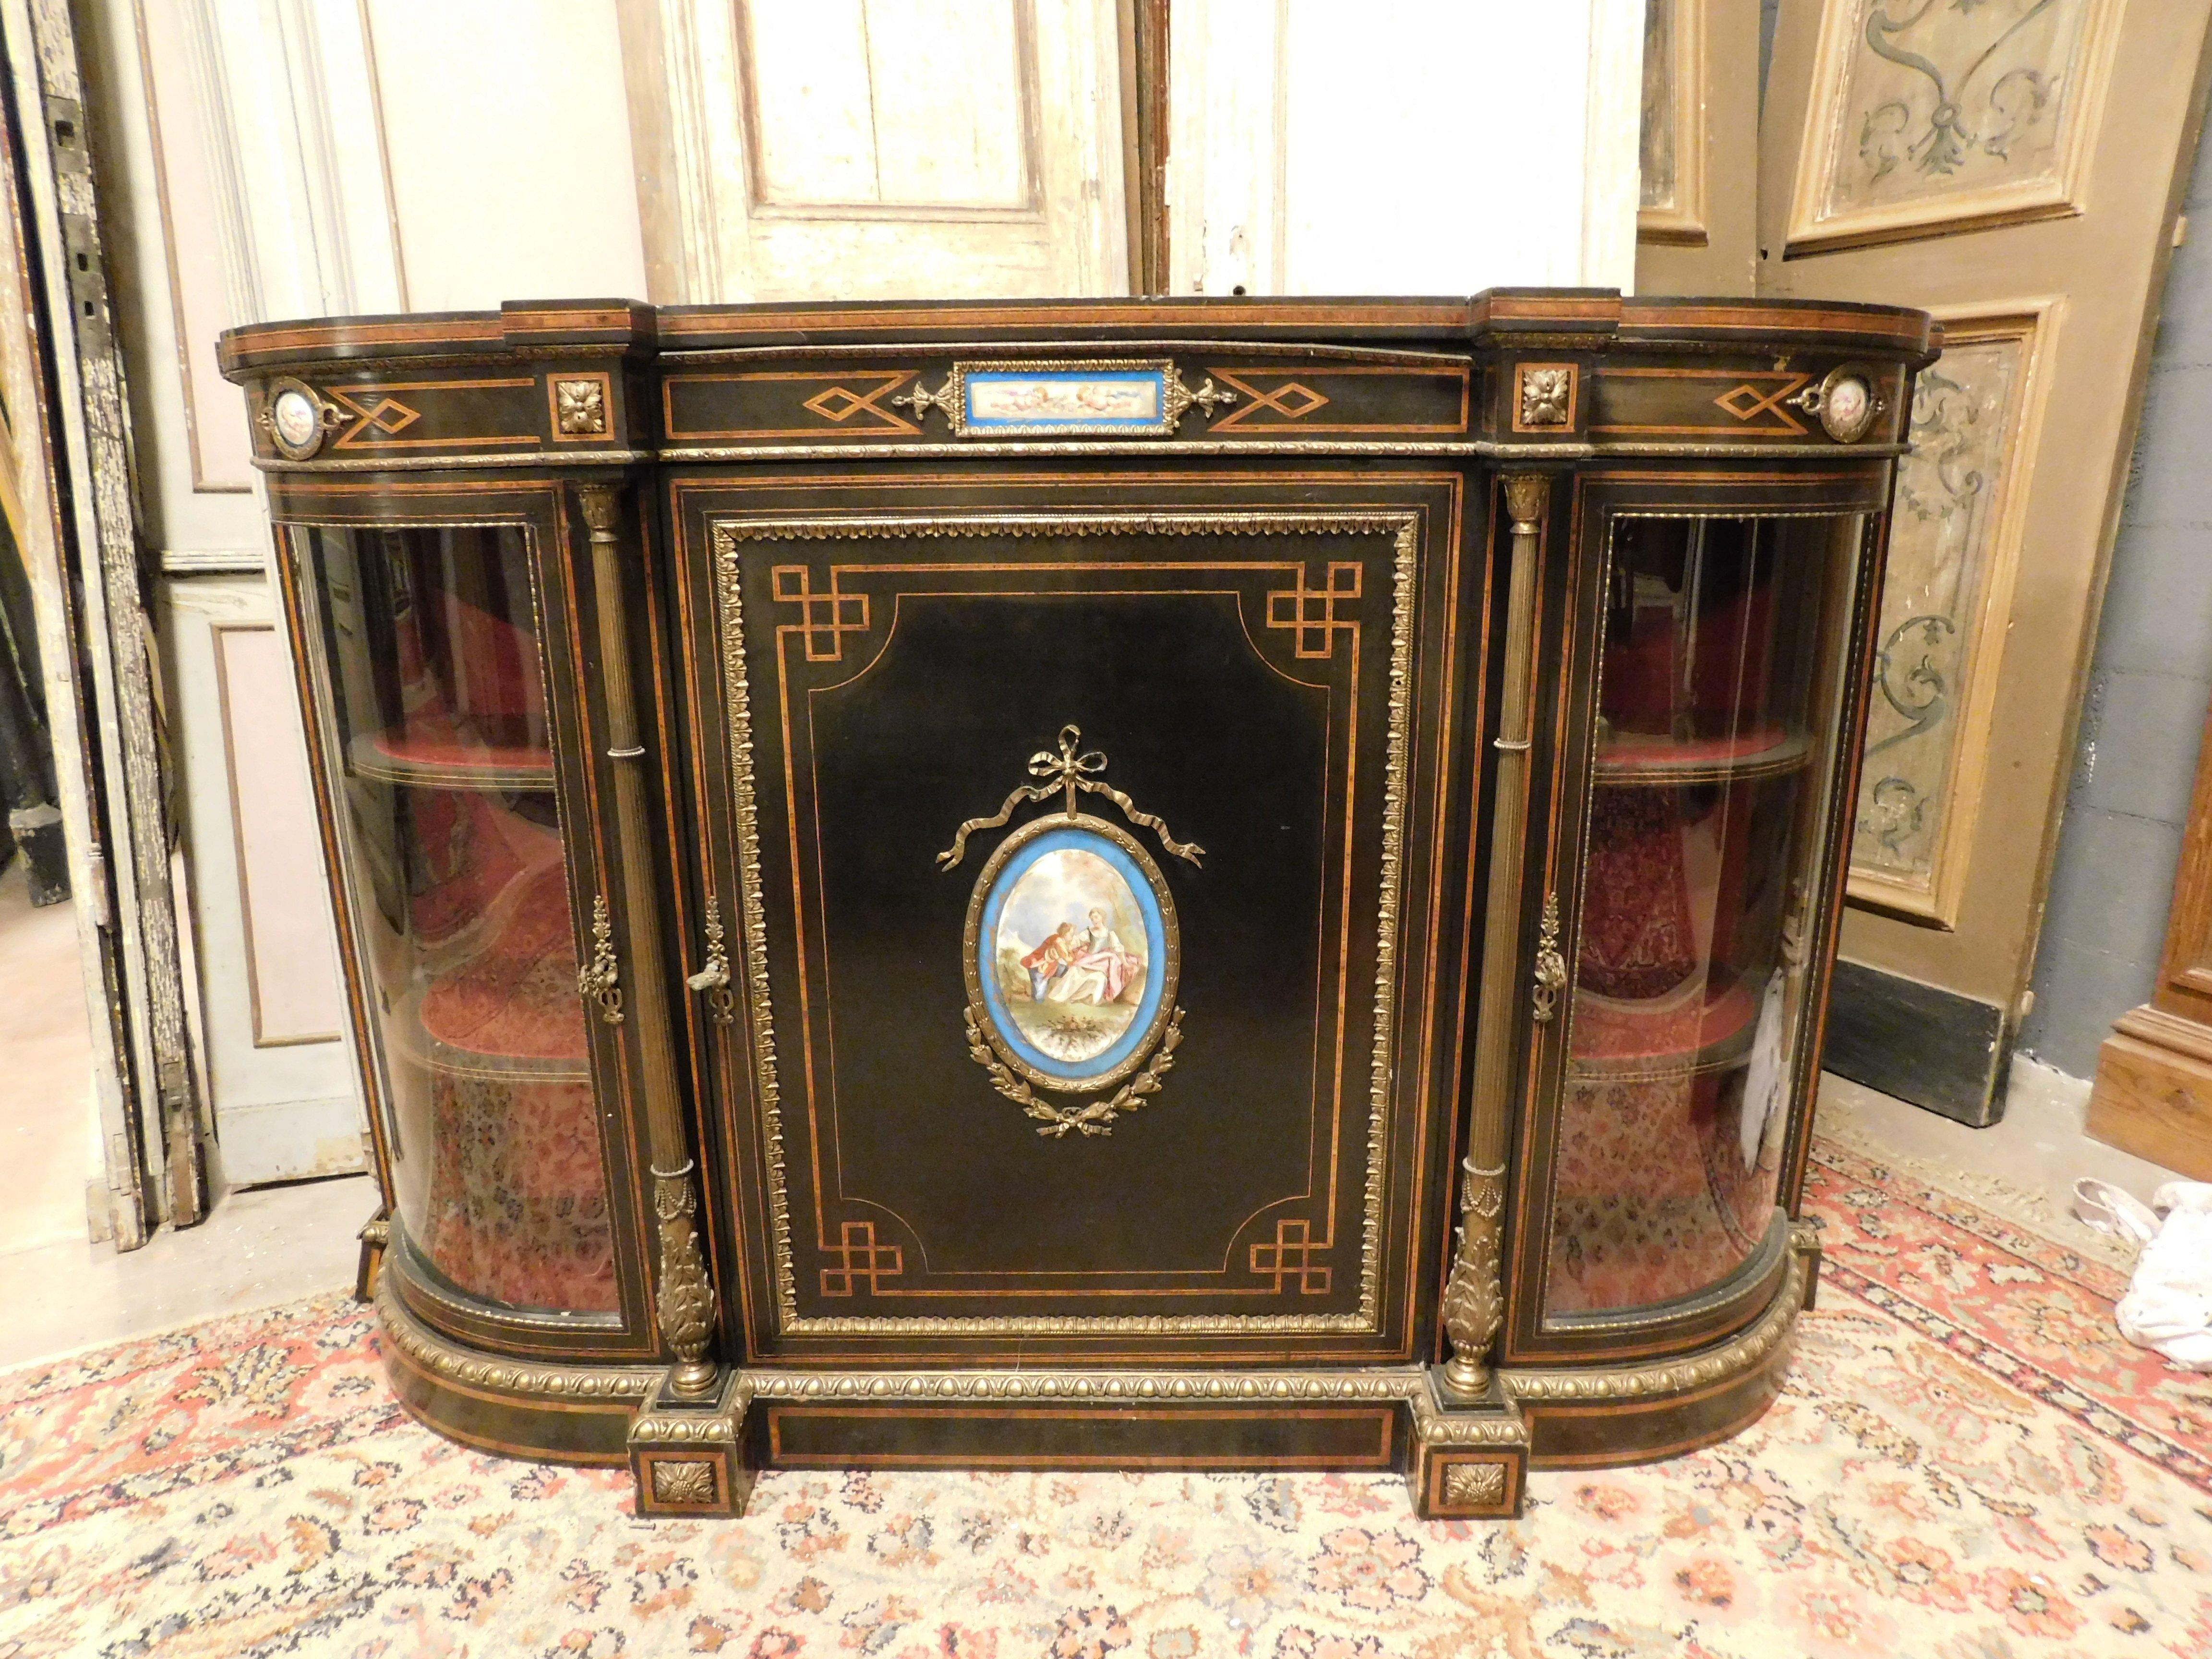 Antique sideboard, Servant in ebonized wood, composed of curved side glass doors with red fabric interior, central door with bar cabinet-type shelves, embellished with gilded bronzes and porcelain plaques by Serves, depicting gallant scenes, from